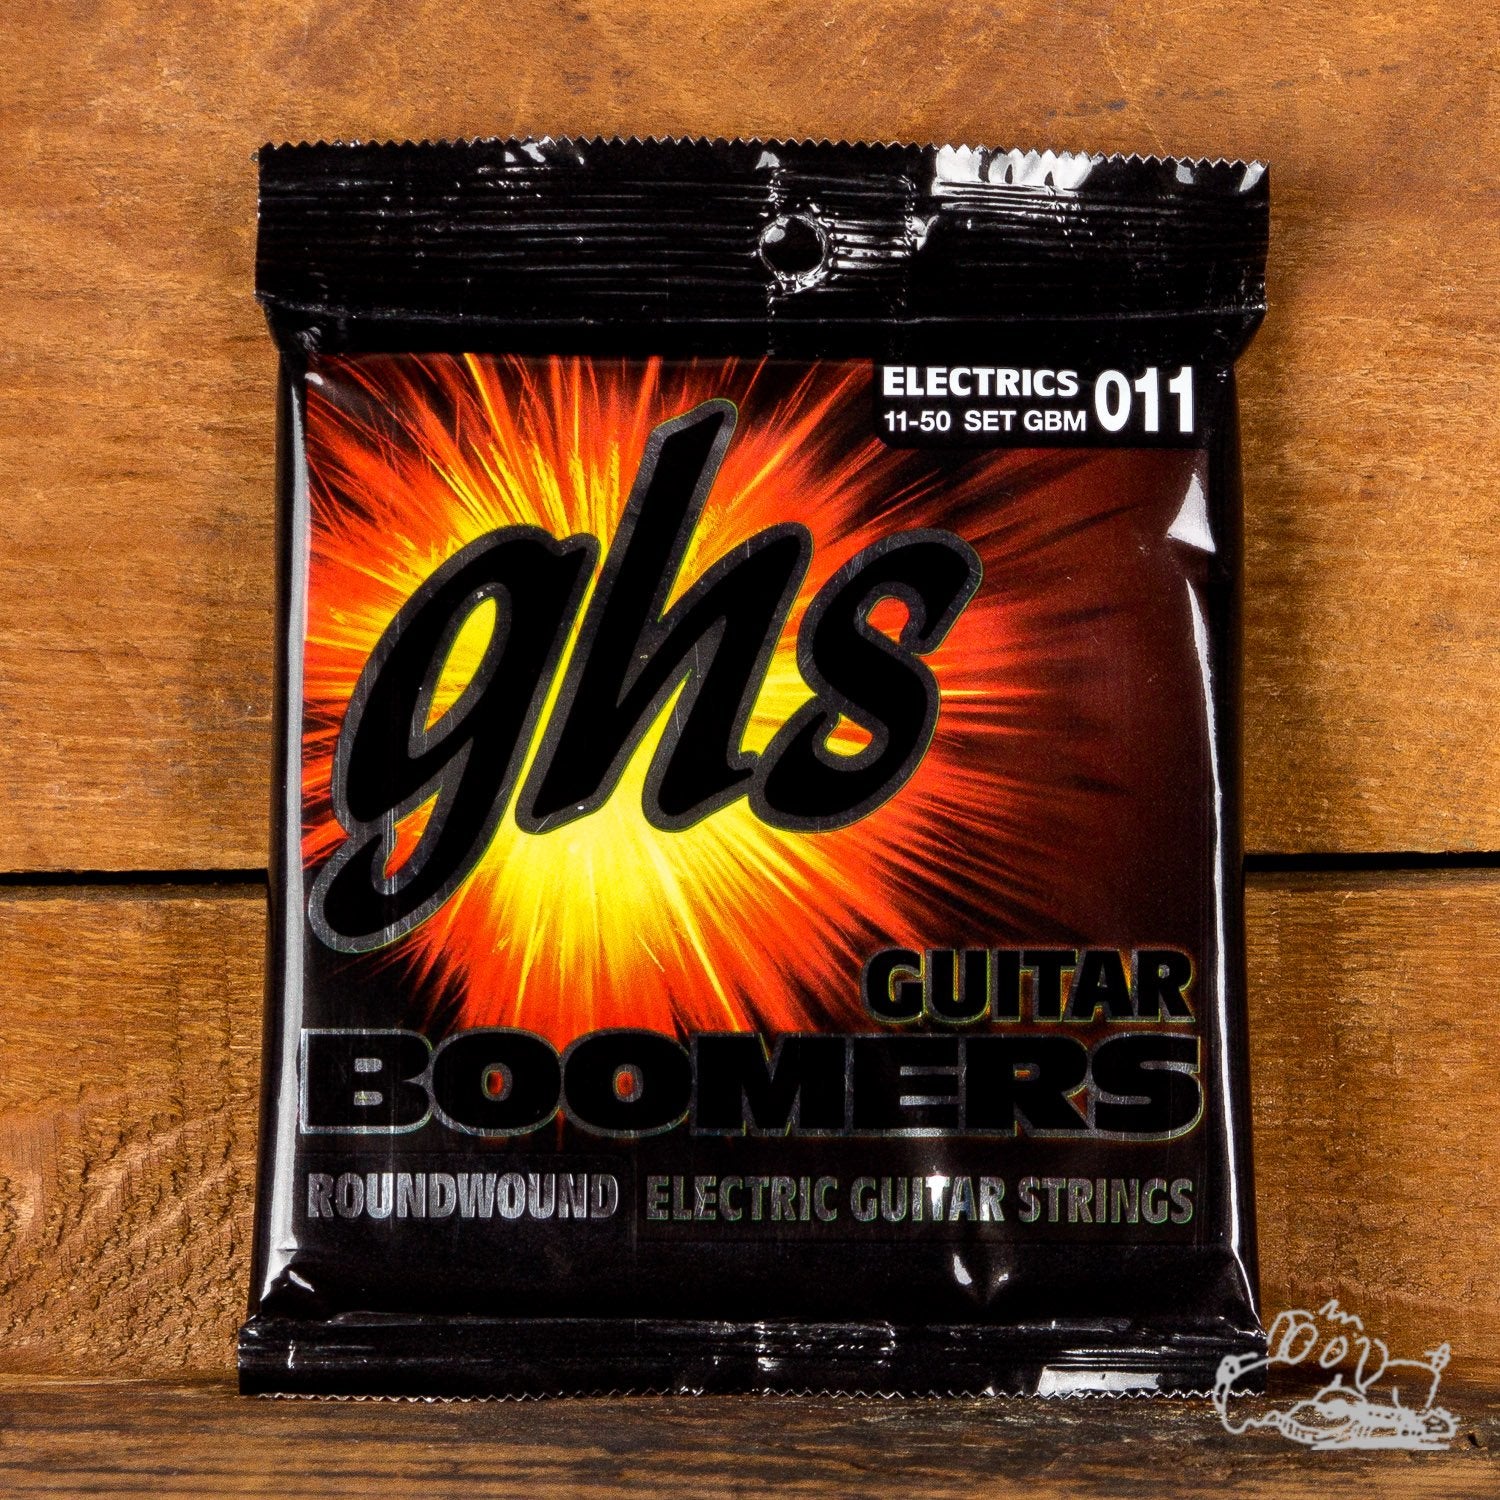 GHS Boomers 11-50 Roundwound Medium Electric Guitar Strings